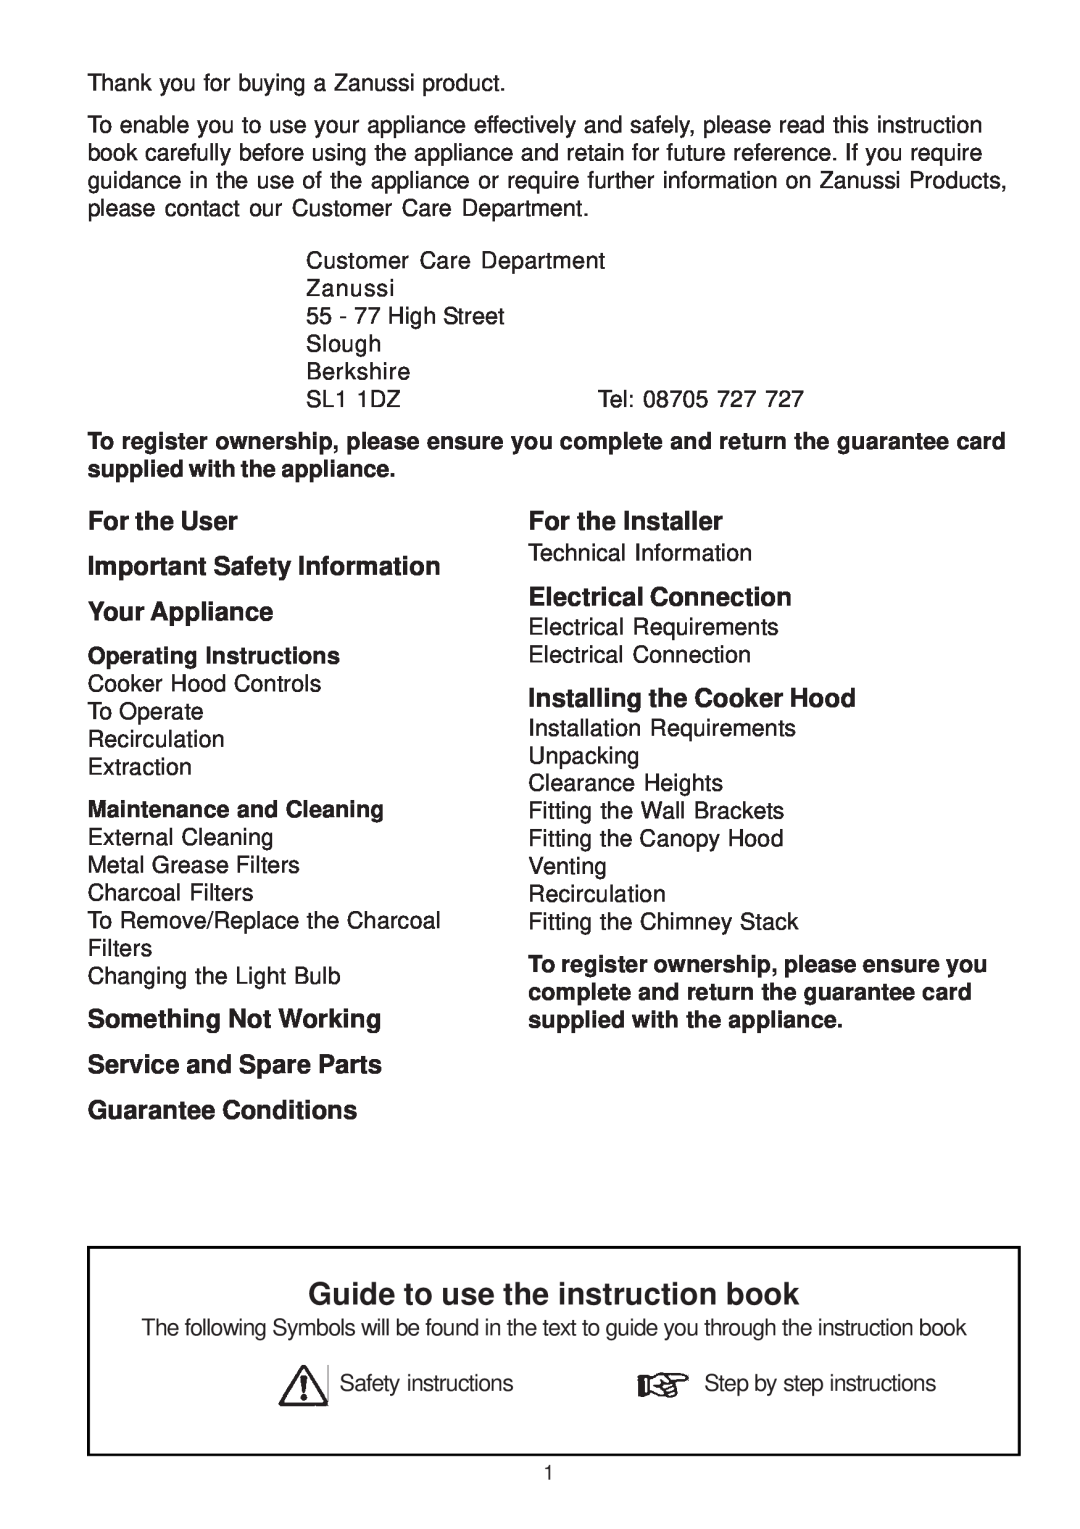 Zanussi ZHC 950 manual Guide to use the instruction book, For the User Important Safety Information Your Appliance 